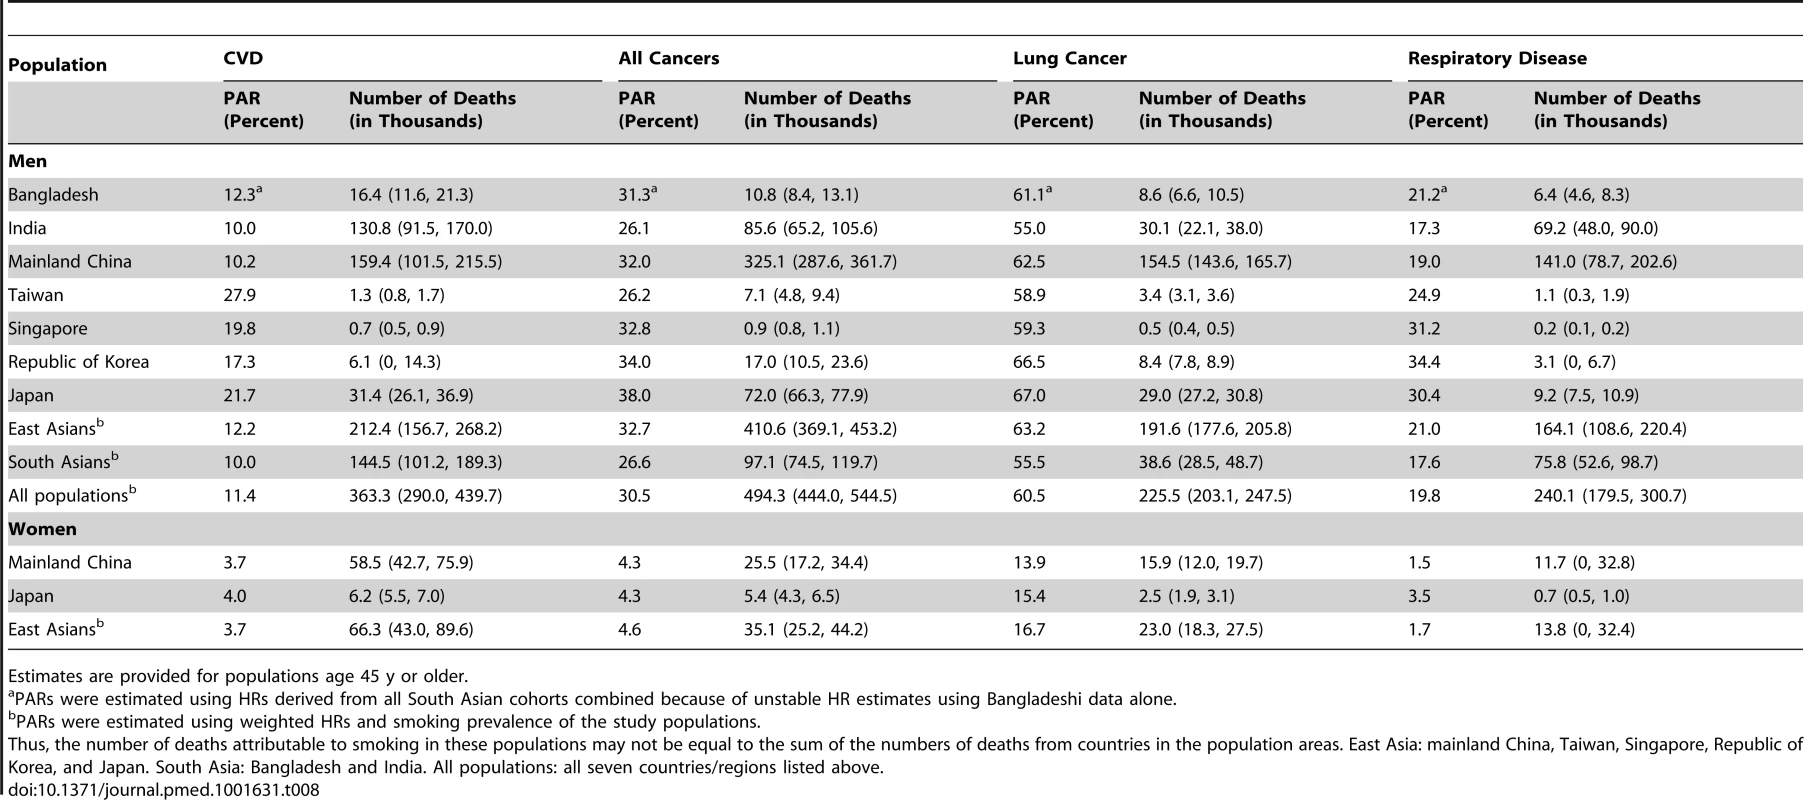 Population-attributable risk and number of cause-specific deaths due to tobacco smoking in selected Asian populations.